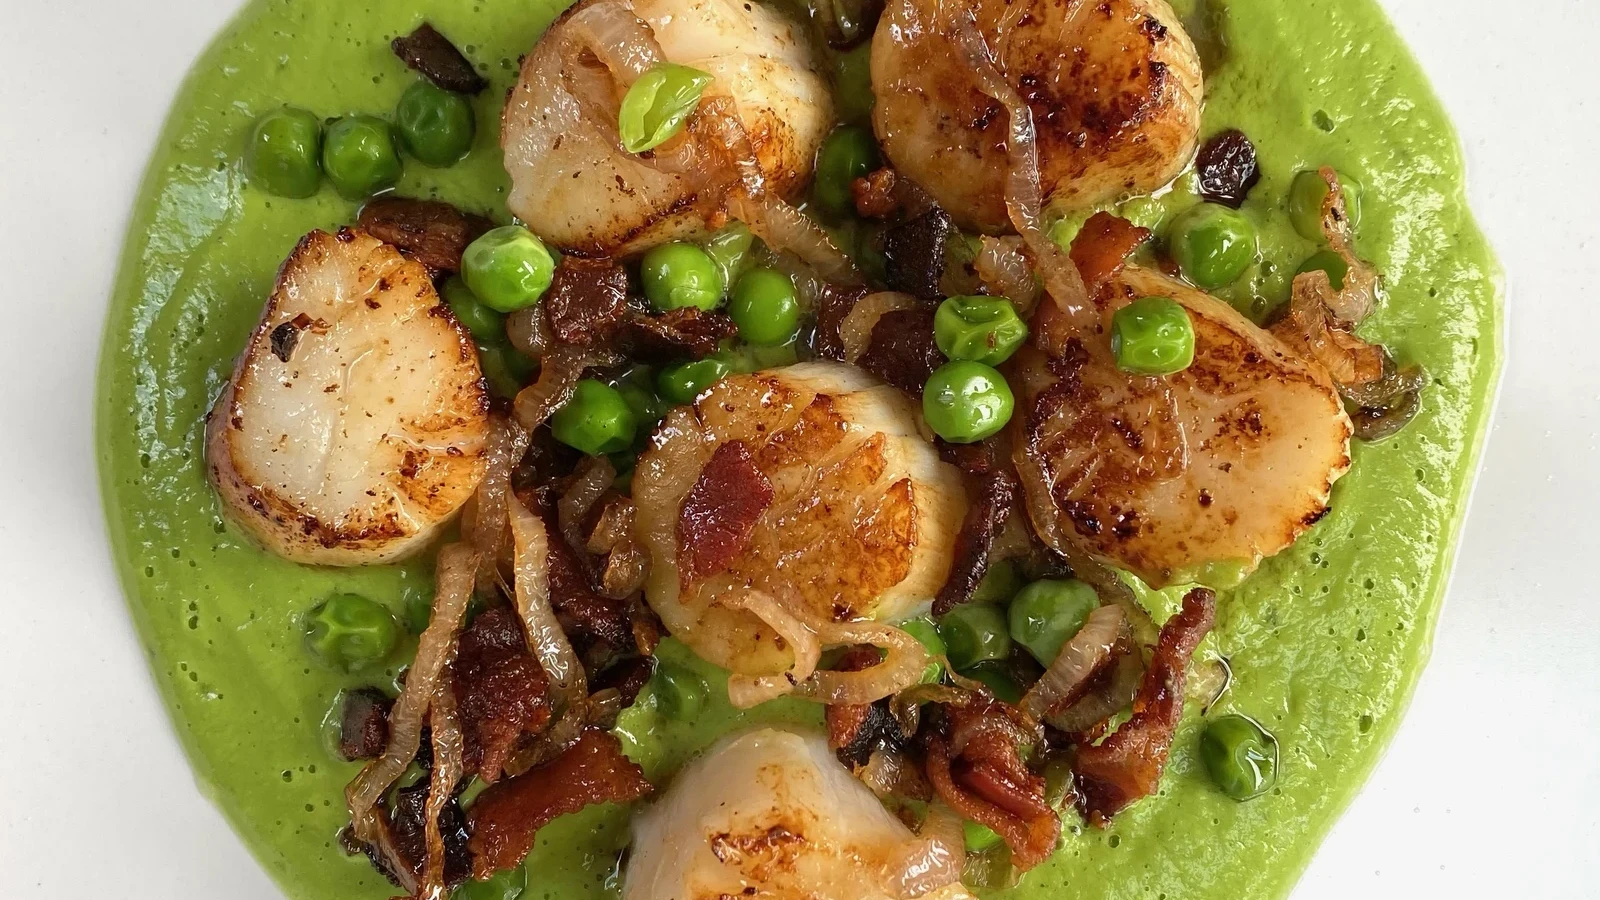 Image of Scallops with Bacon, Shallot & Pea Purée